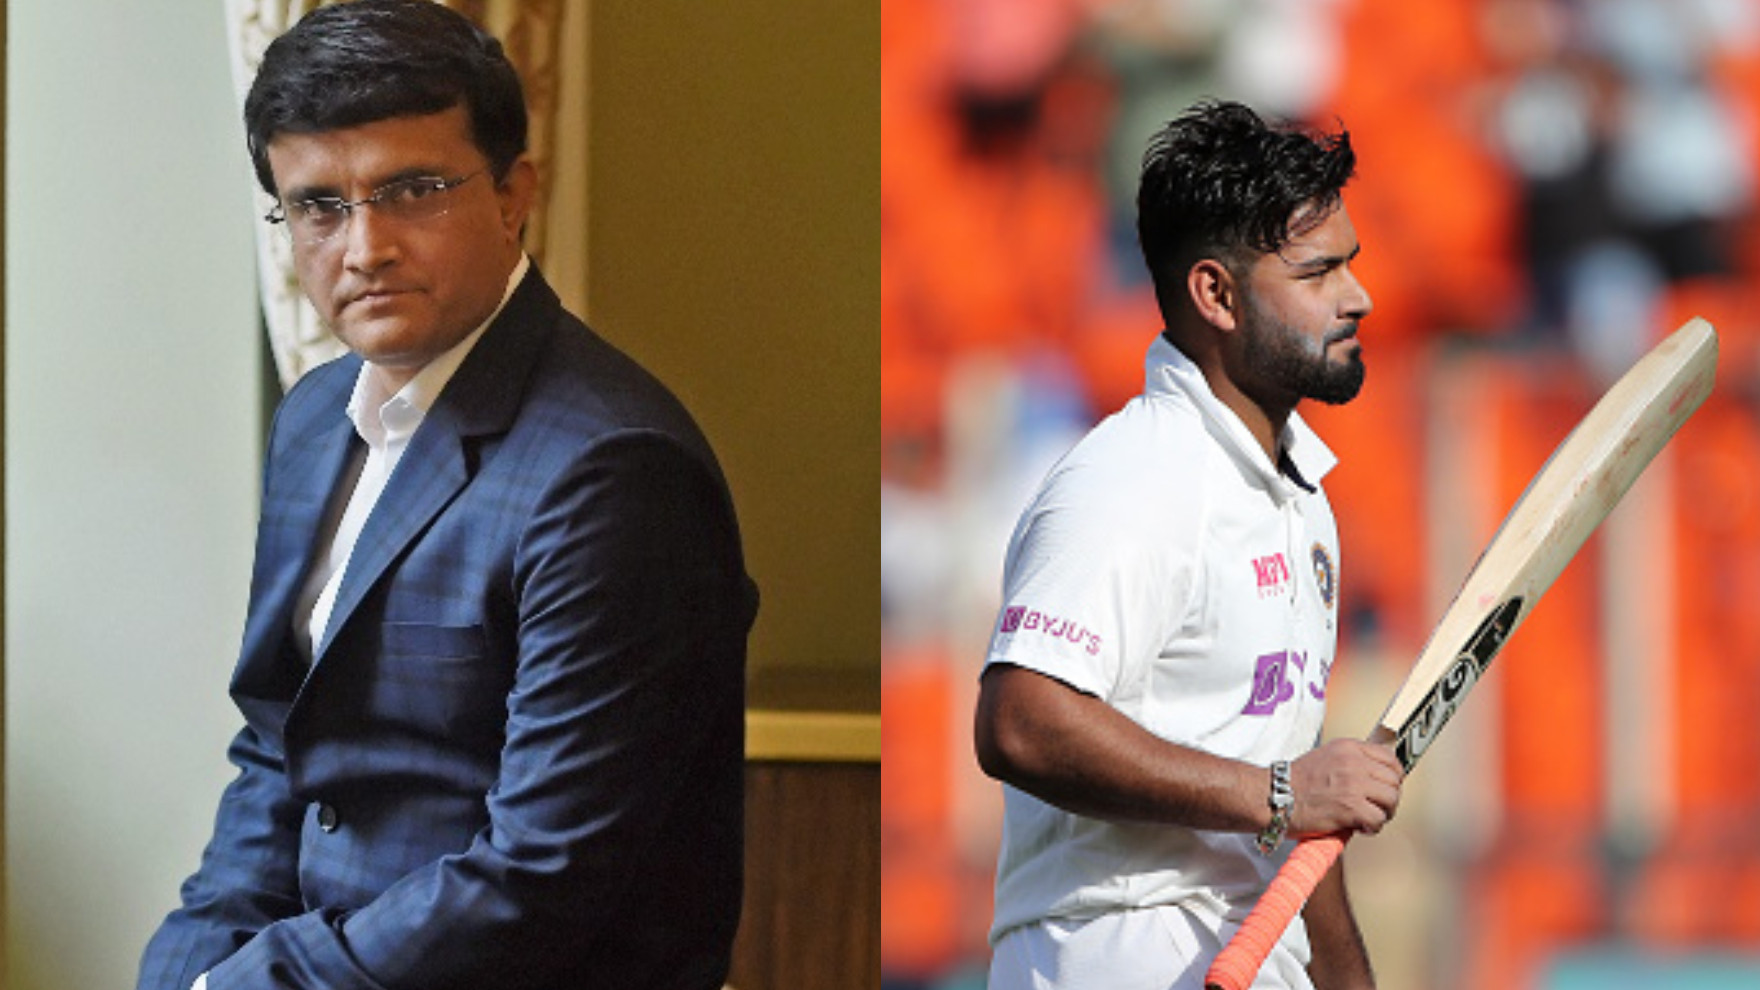 IND v ENG 2021: “How good is he?” Sourav Ganguly lauds “match-winner” Rishabh Pant for his exciting 101 